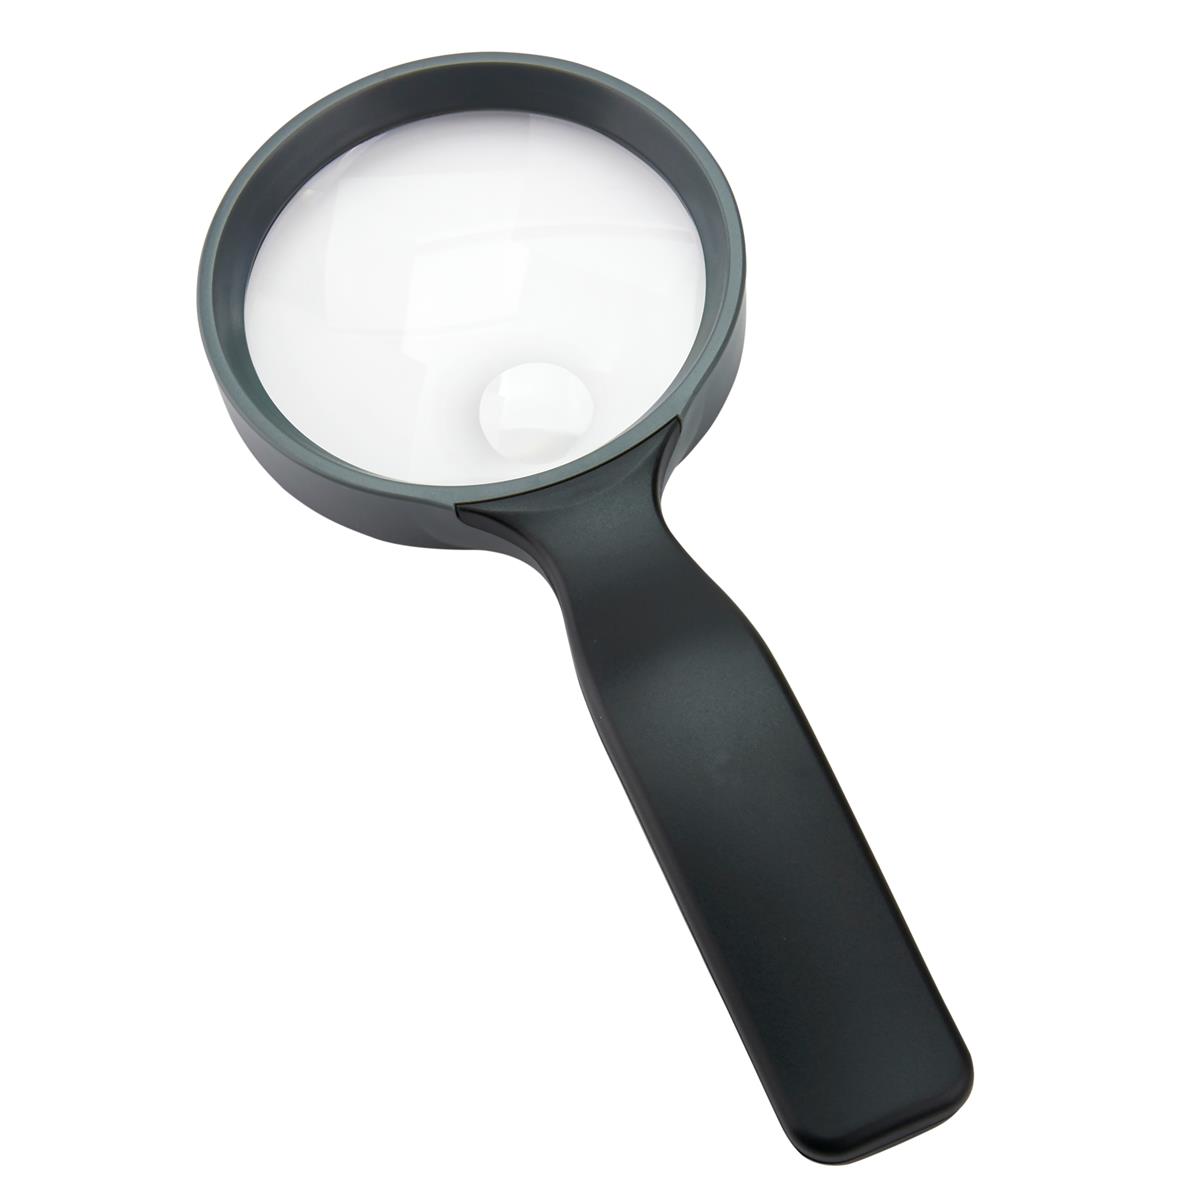 Image of Carson JS36 2x HandHeld Series Magnifier with 4.5x Power Bifocal Spot Lens